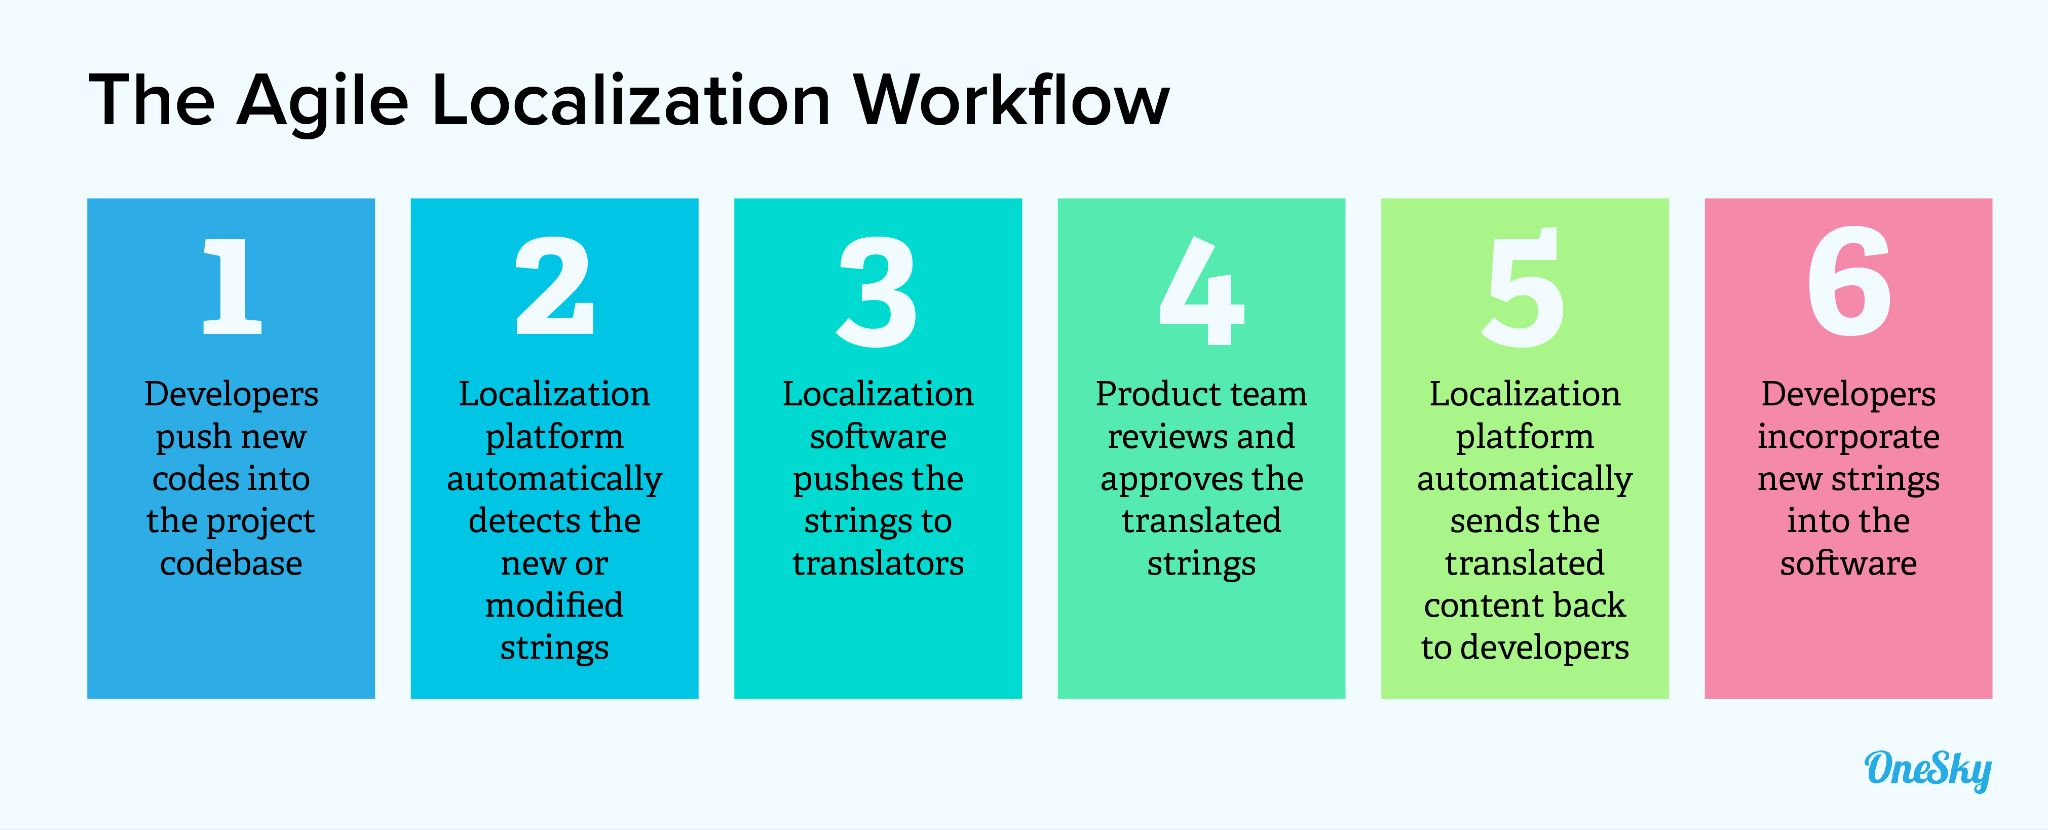 The Agile Localization Workflow